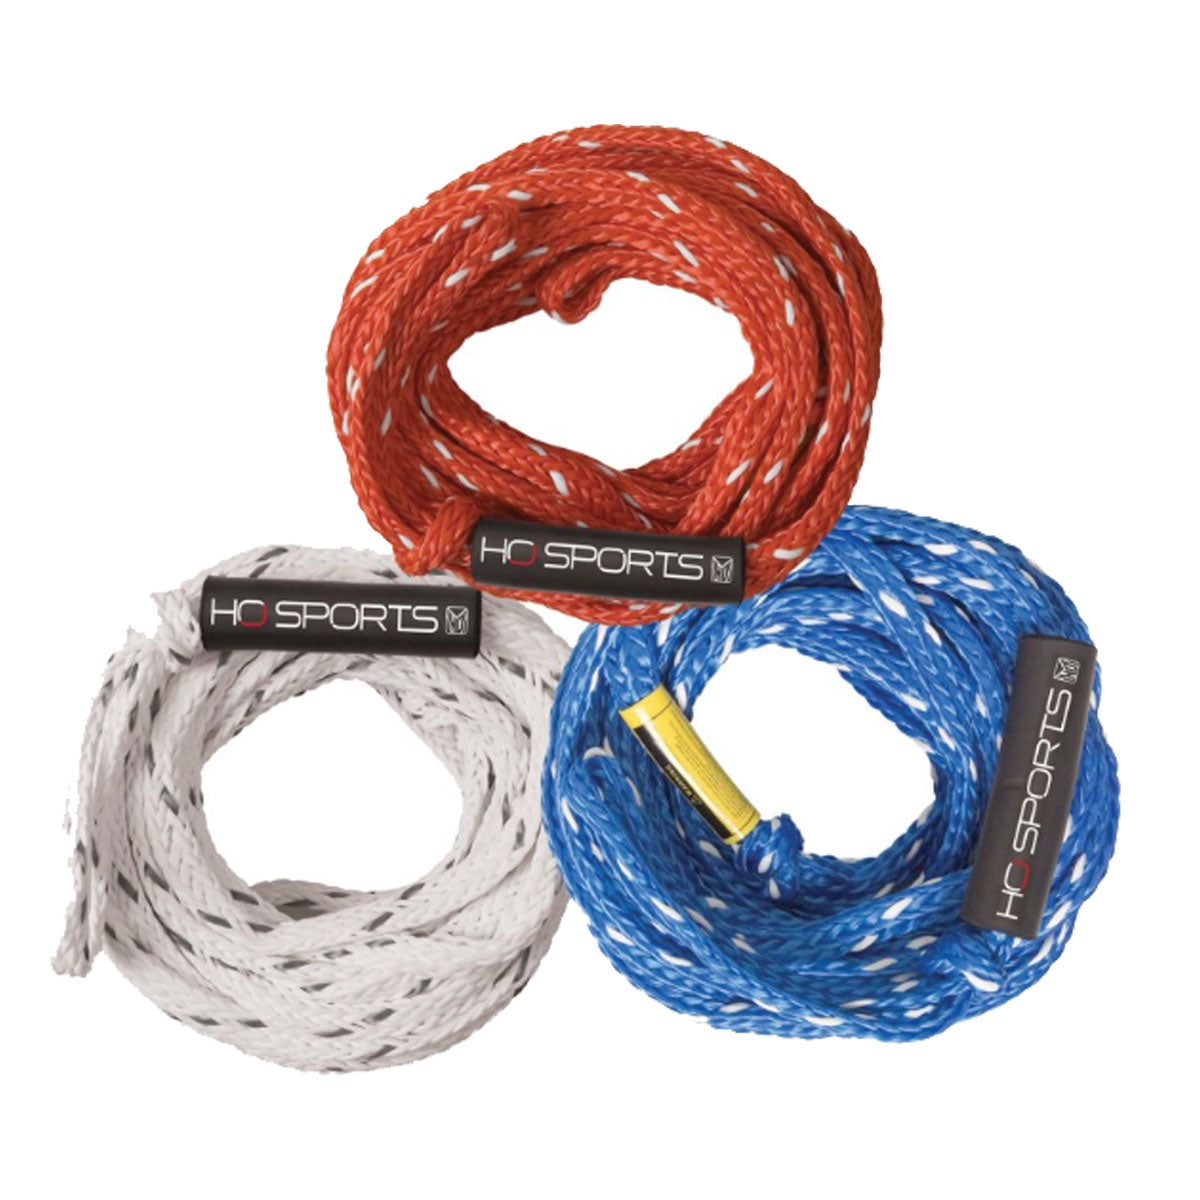 HO Sports 4K Tube Rope - Assorted Colors